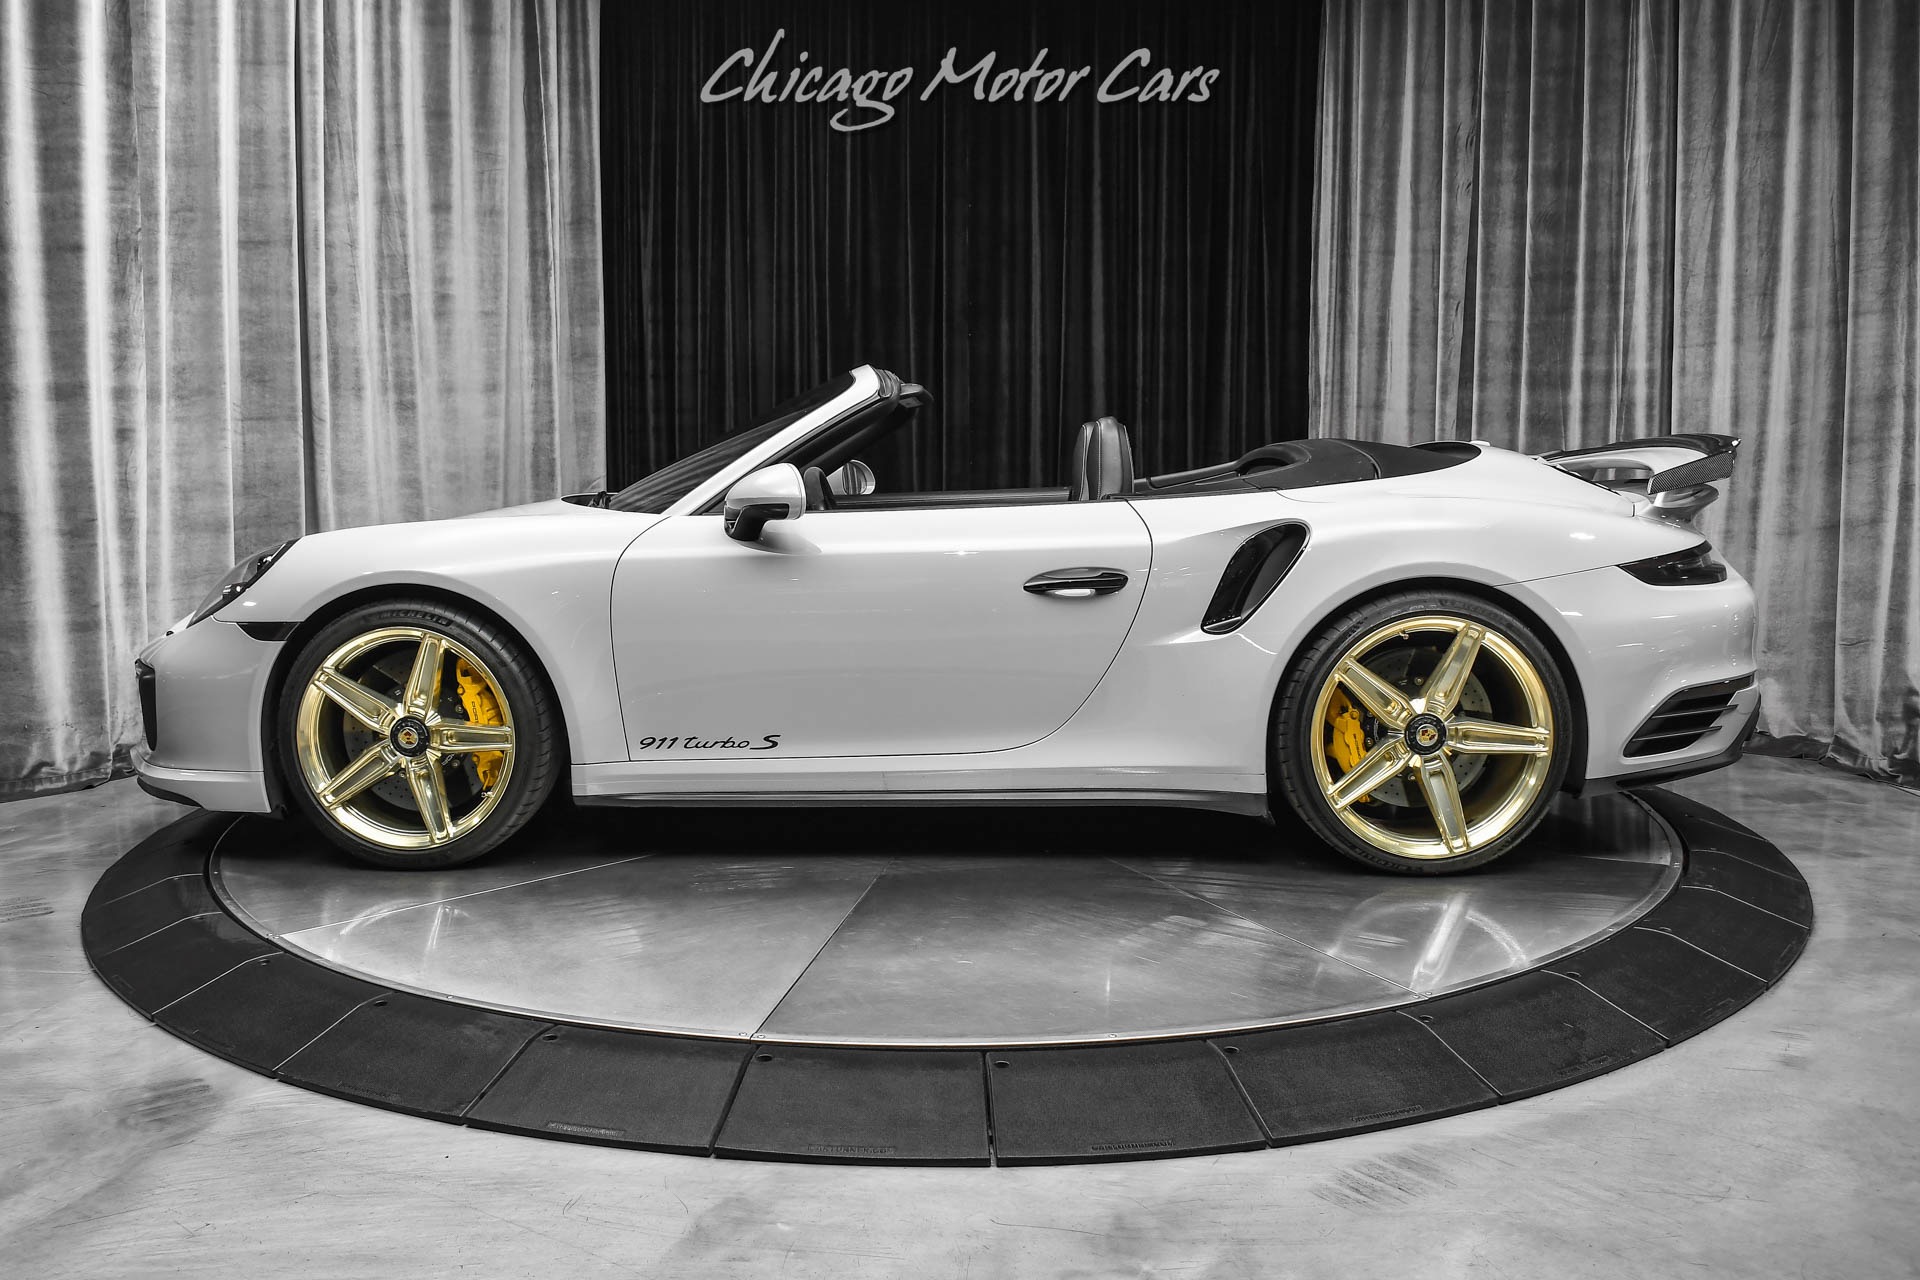 New 2017 Porsche 911 Turbo S Cabriolet Convertible MSRP $224K+ PTS Fashion  Gray! LOADED! For Sale ($144,800)